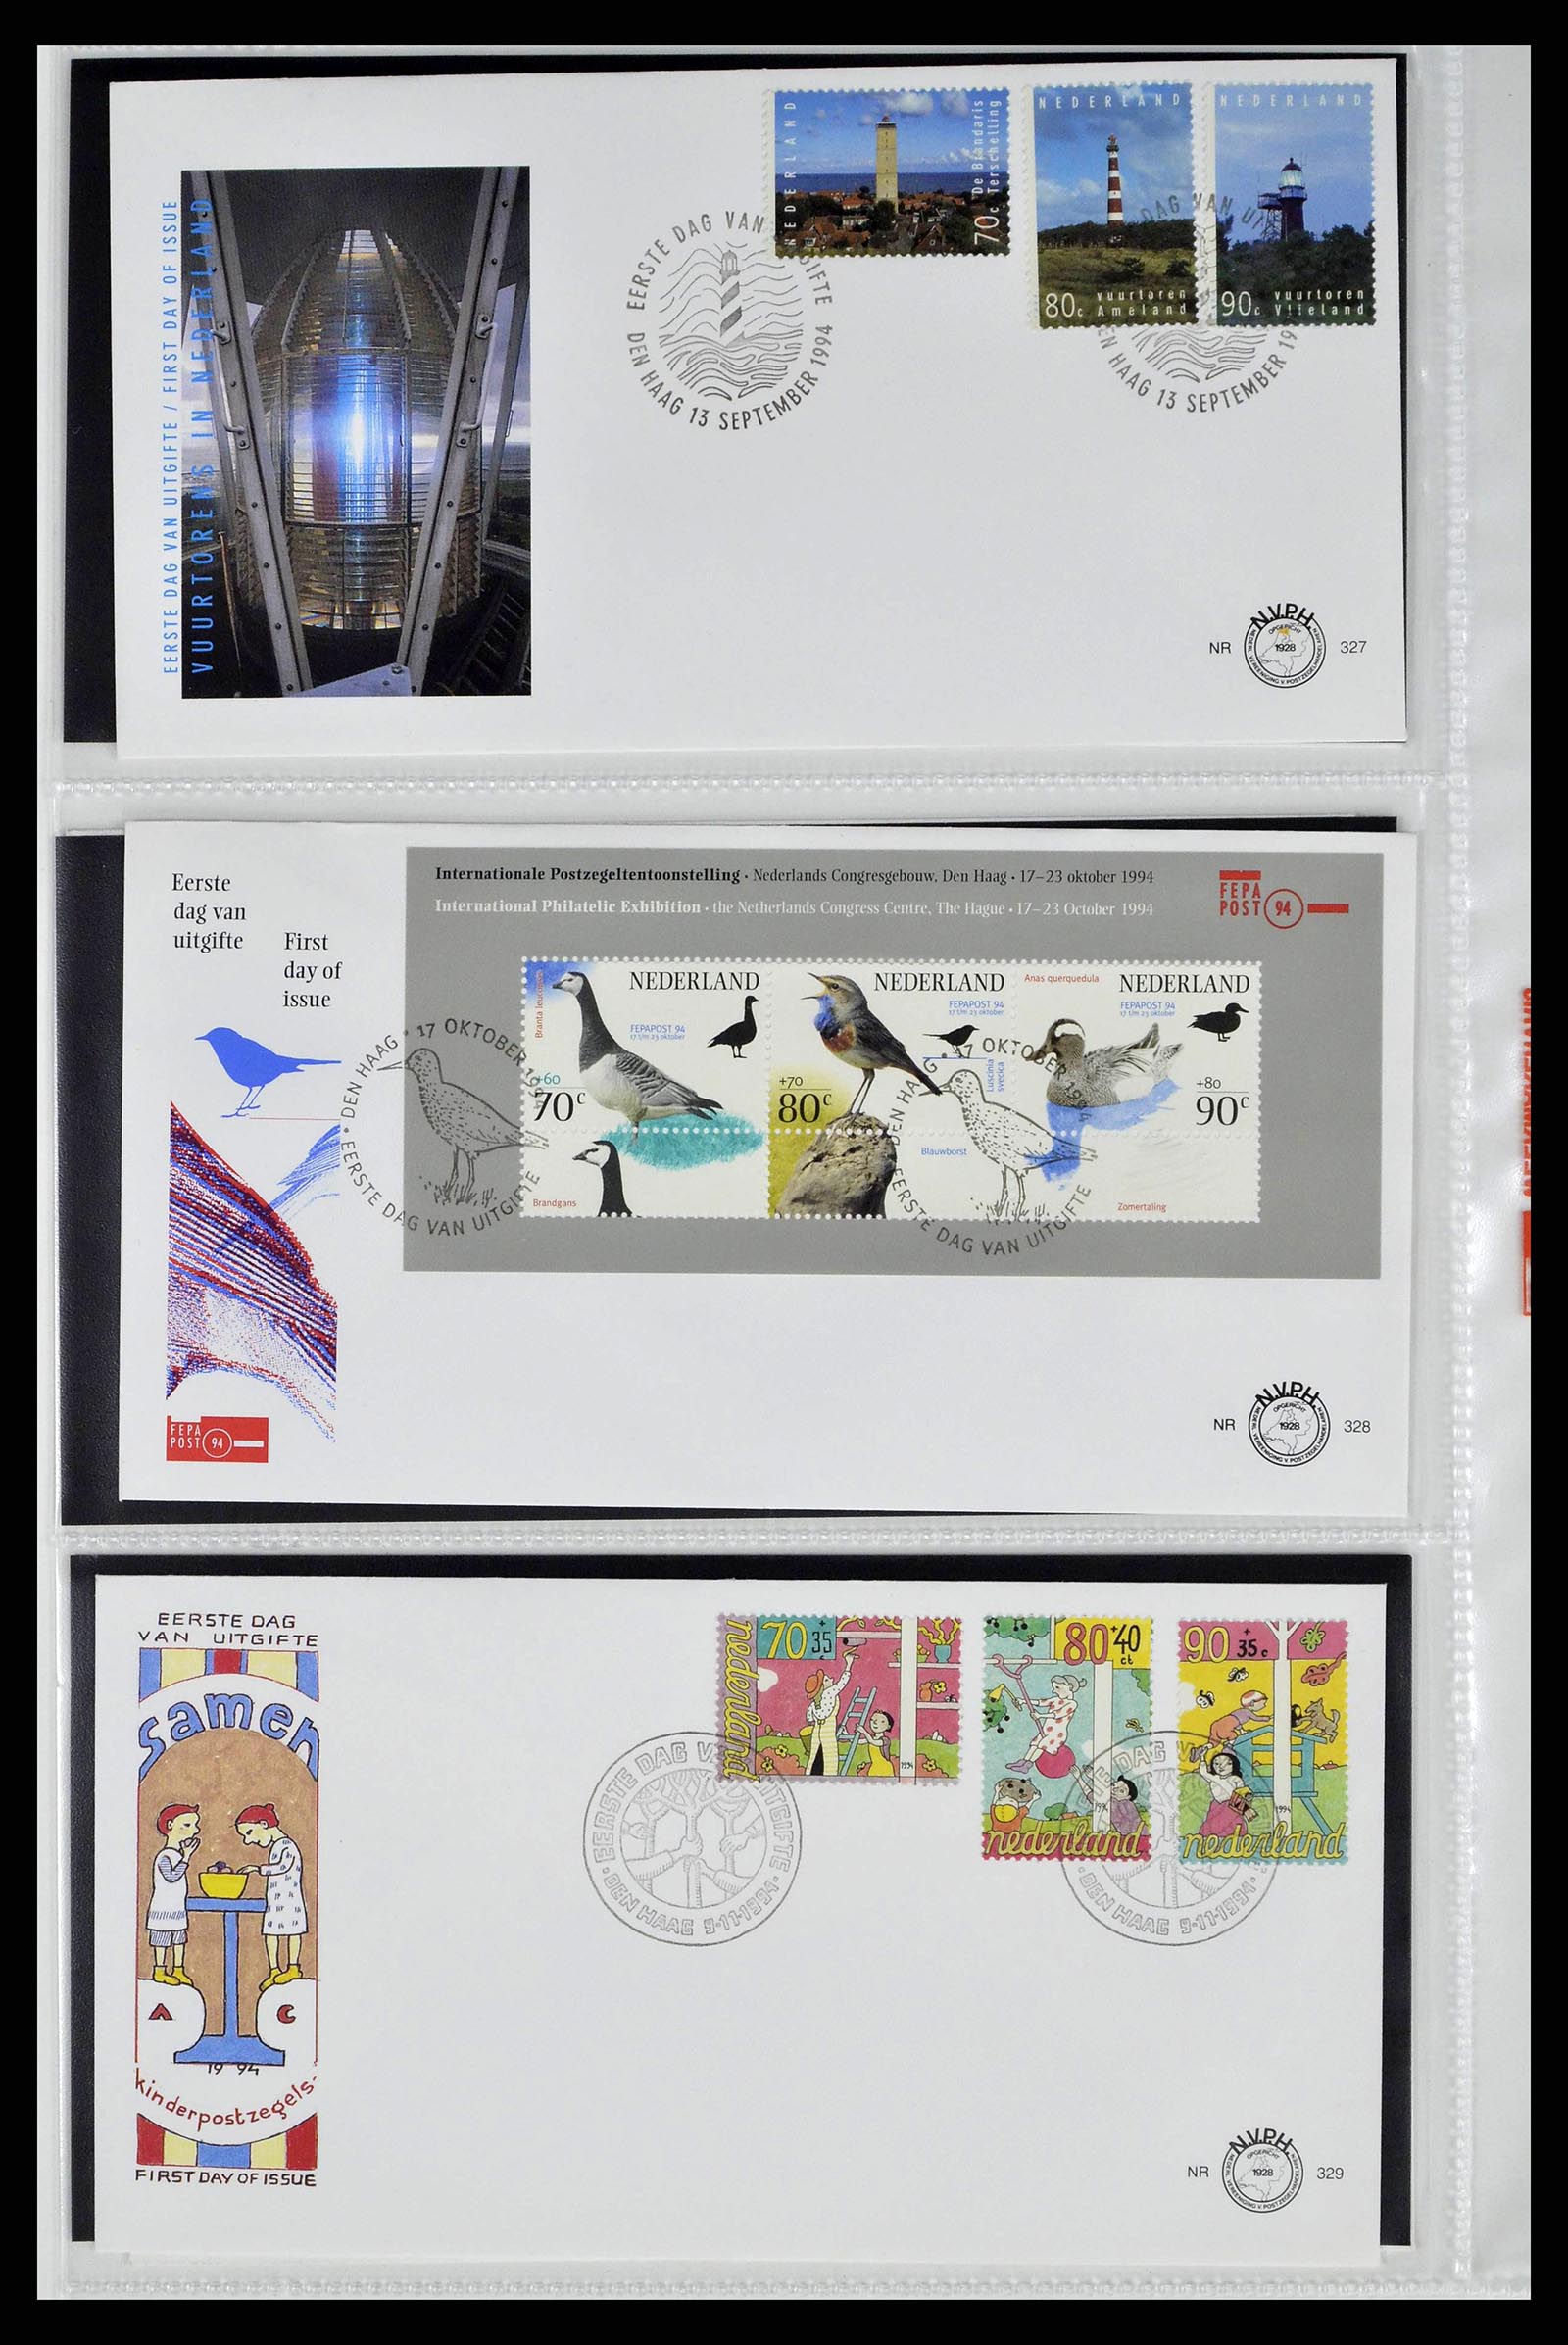 38517 0174 - Stamp collection 38517 Netherlands FDC's 1981-2011.